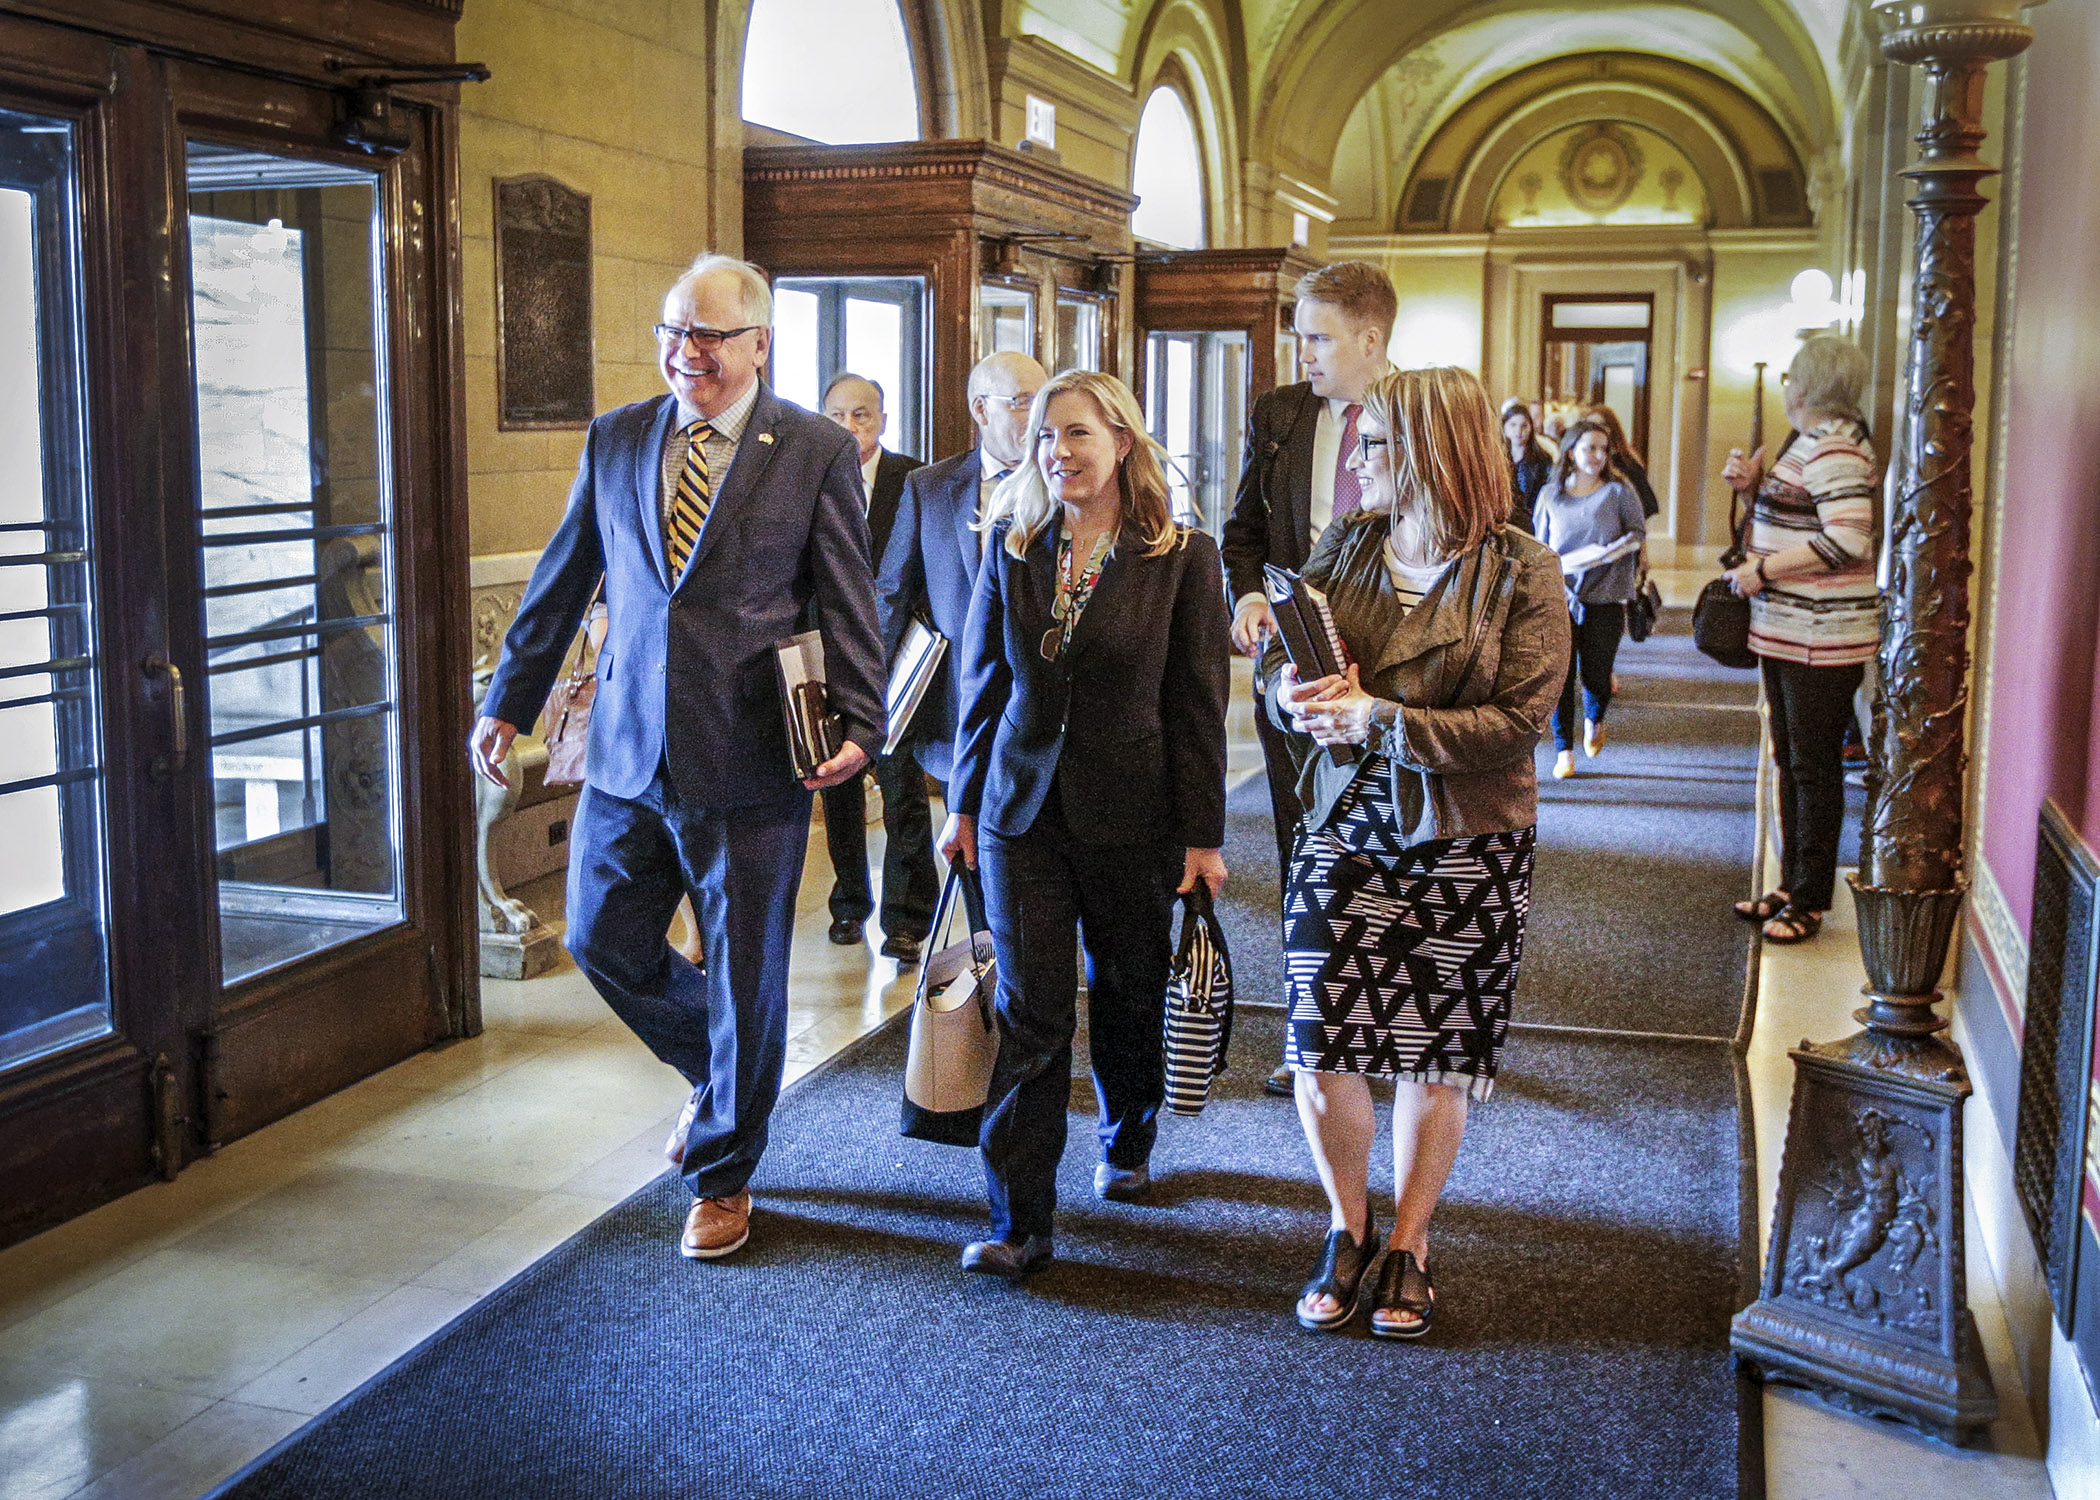 Gov. Tim Walz, House Speaker Melissa Hortman and Lt. Gov. Peggy Flanagan stride past the front doors of the Capitol en route to Tuesday afternoon’s budget negotiations with Senate Majority Leader Paul Gazelka and others. Photo by Paul Battaglia